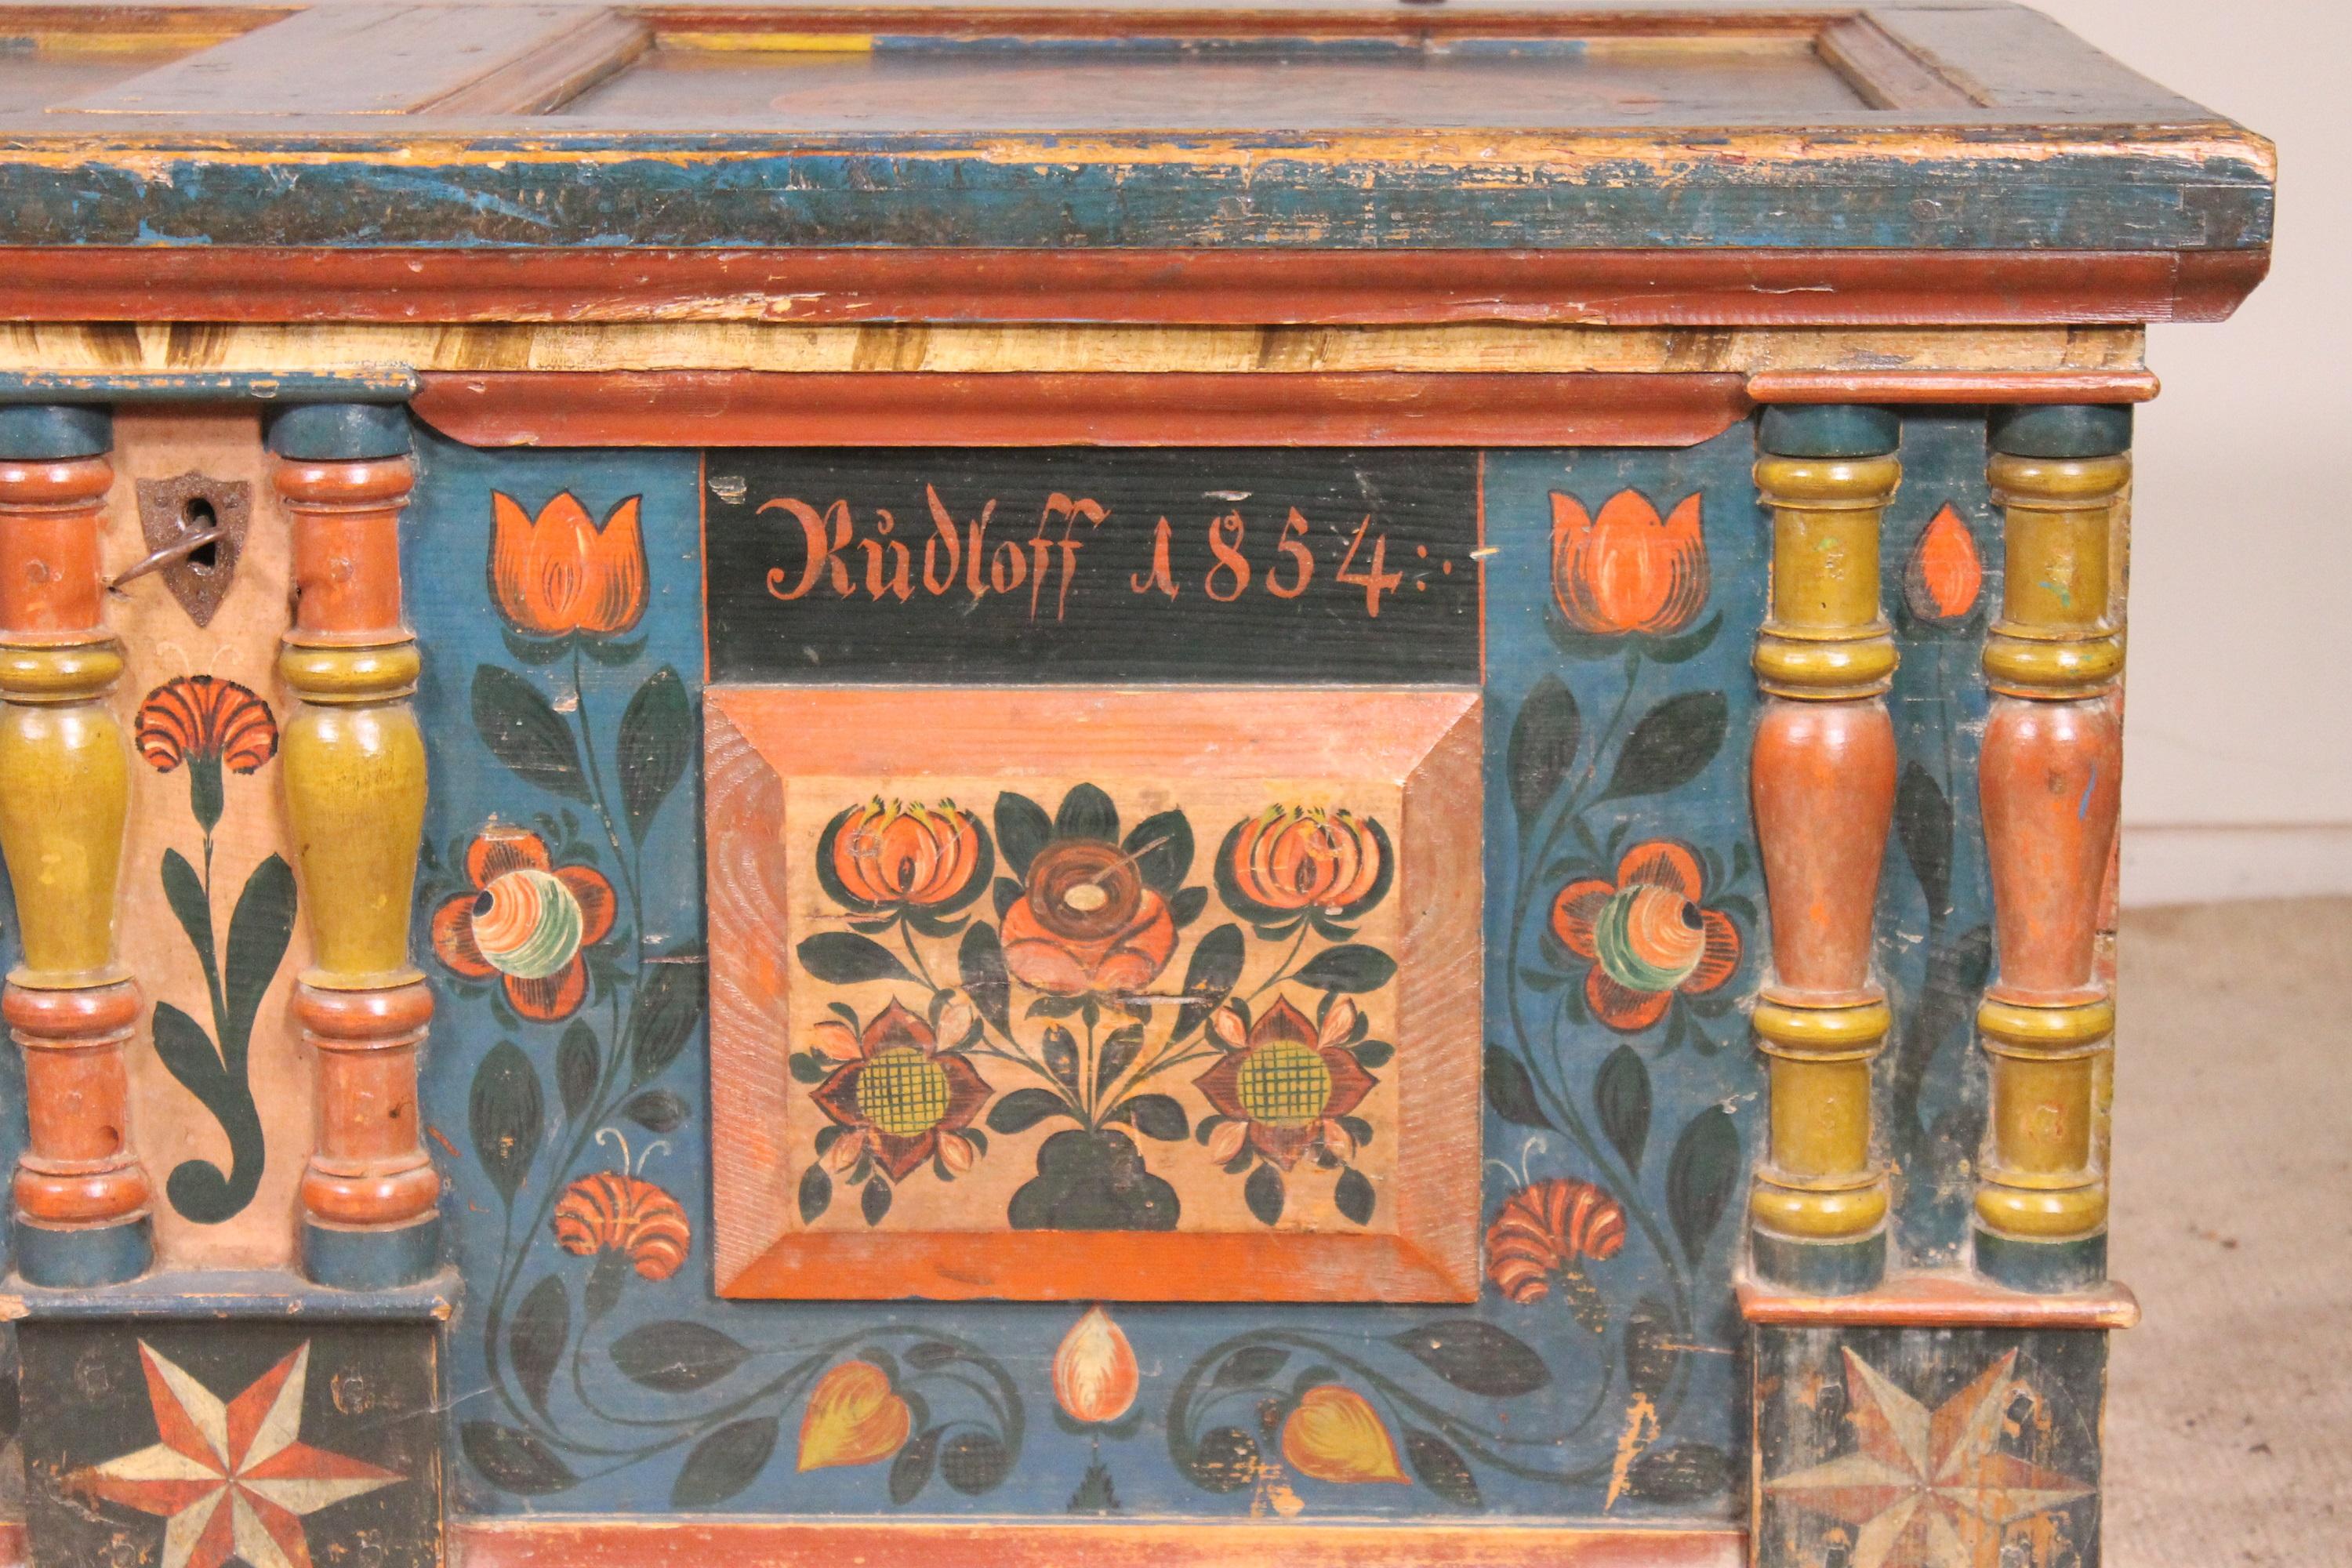 Superb Austrian wedding chest dated 1856 in polychrome wood decorated with flowers, stars and bouquets of flowers
We can find the names of the two newlyweds on the front with the presence of flowers symbolizing marriage

The chest opens into a